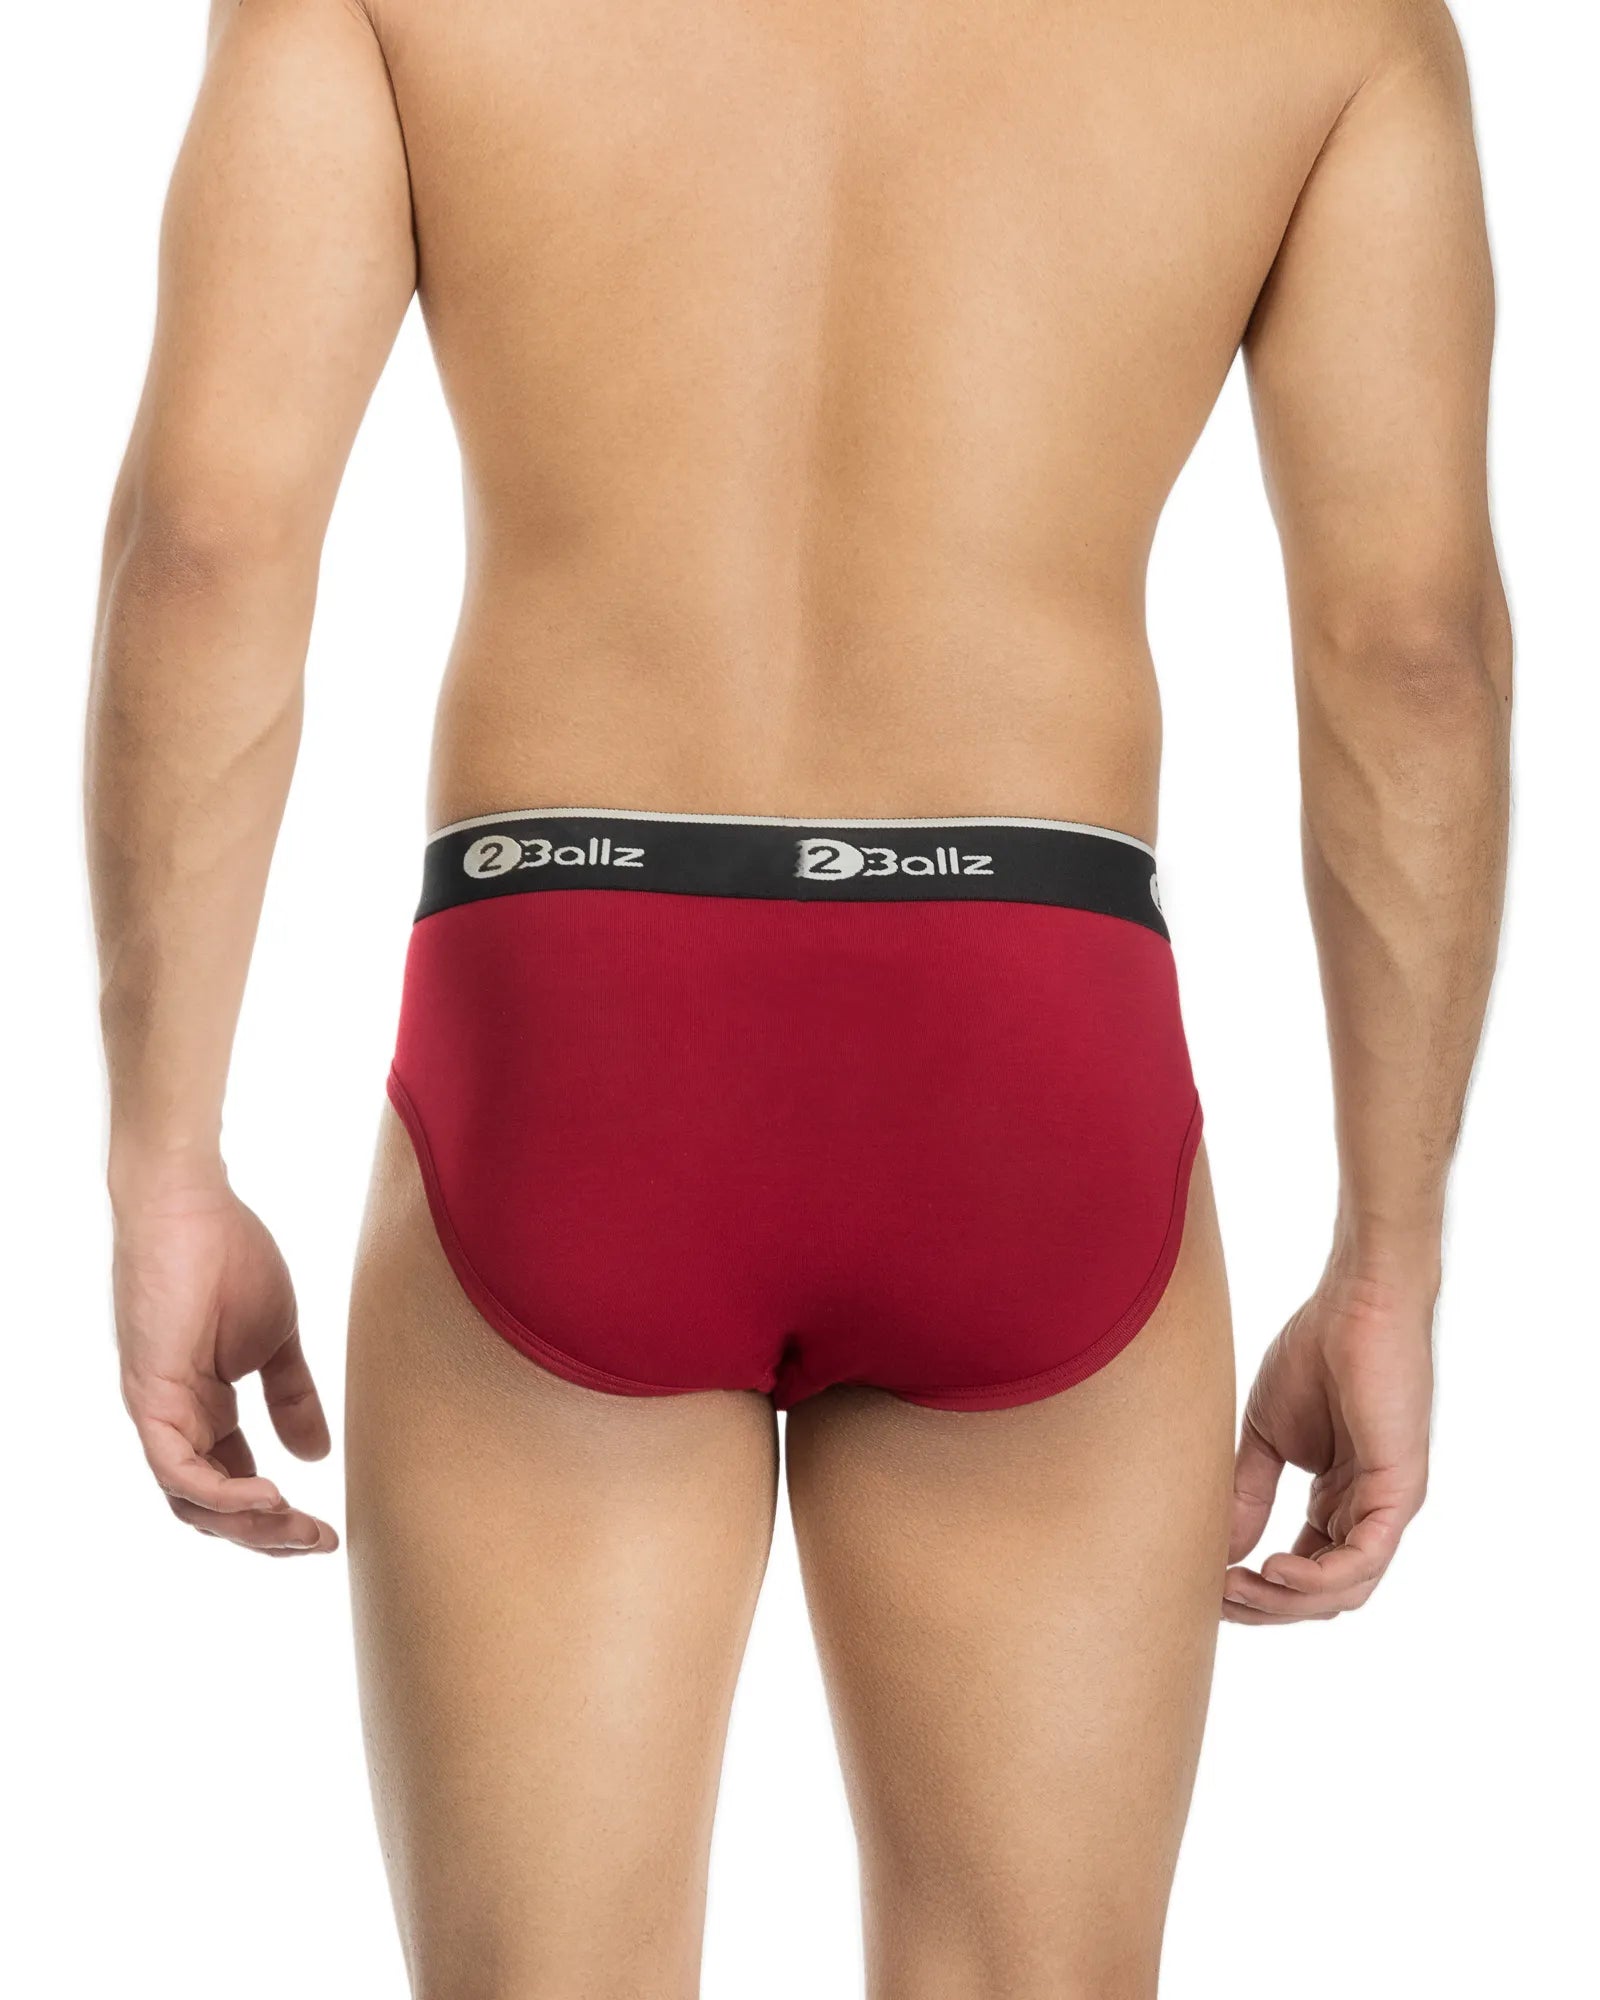 2Ballz Brief with Built-in Pouch (Pack of 1) - 2Ballz Clothing